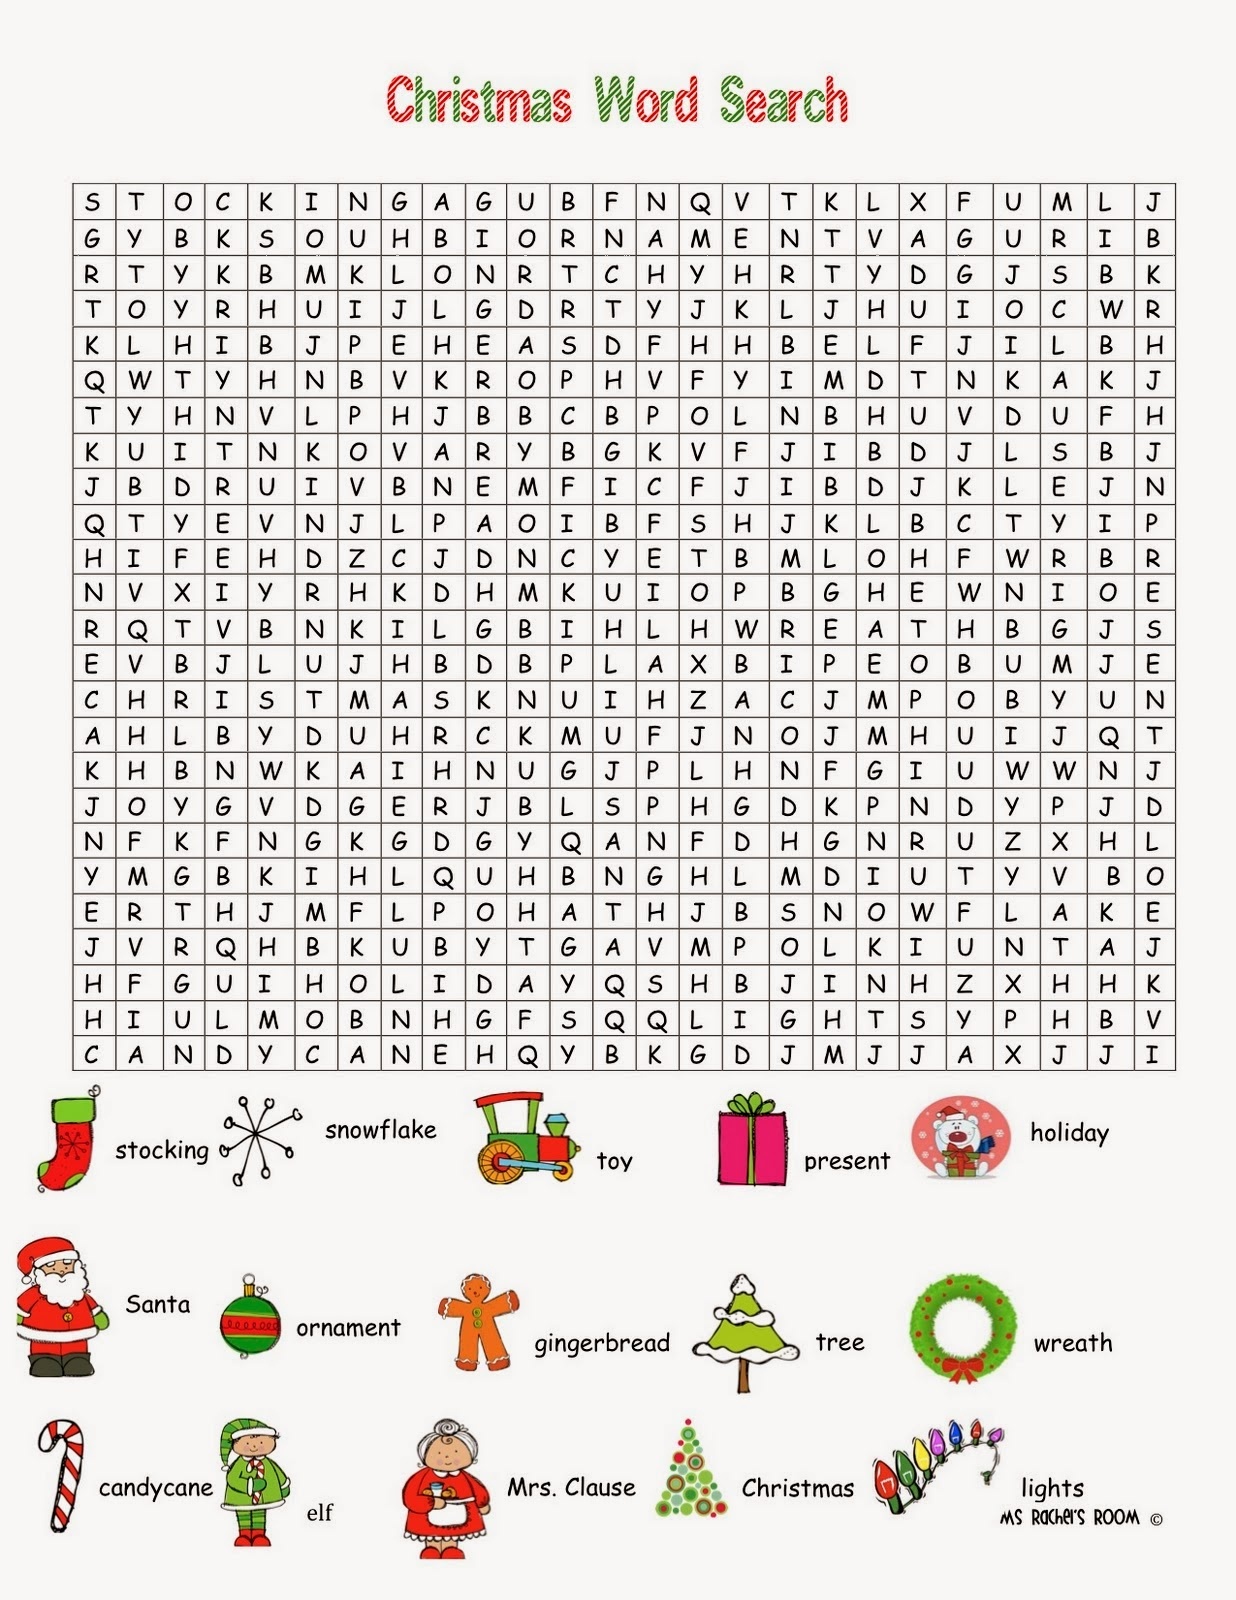 36 Printable Christmas Word Search Puzzles | Kittybabylove - Free Online Printable Word Search